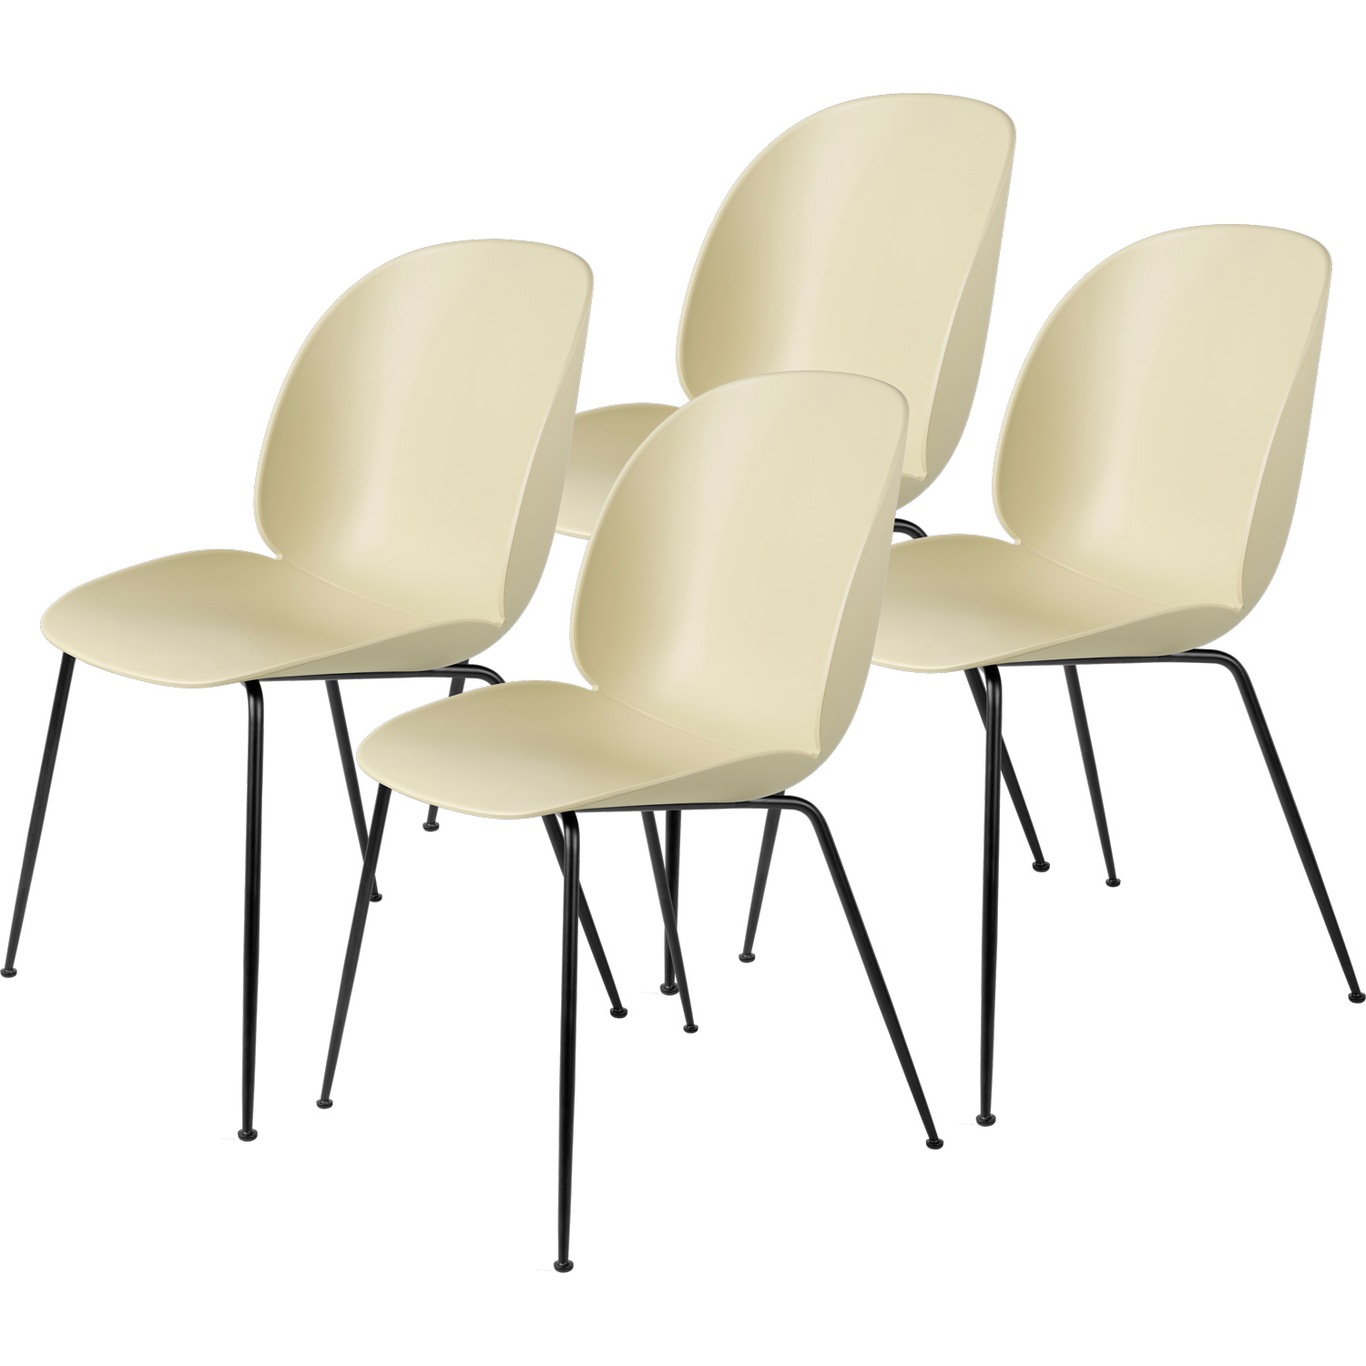 Beetle Dining Chair Unupholstered, Conic Base Black, Set Of 4, Pastel Green